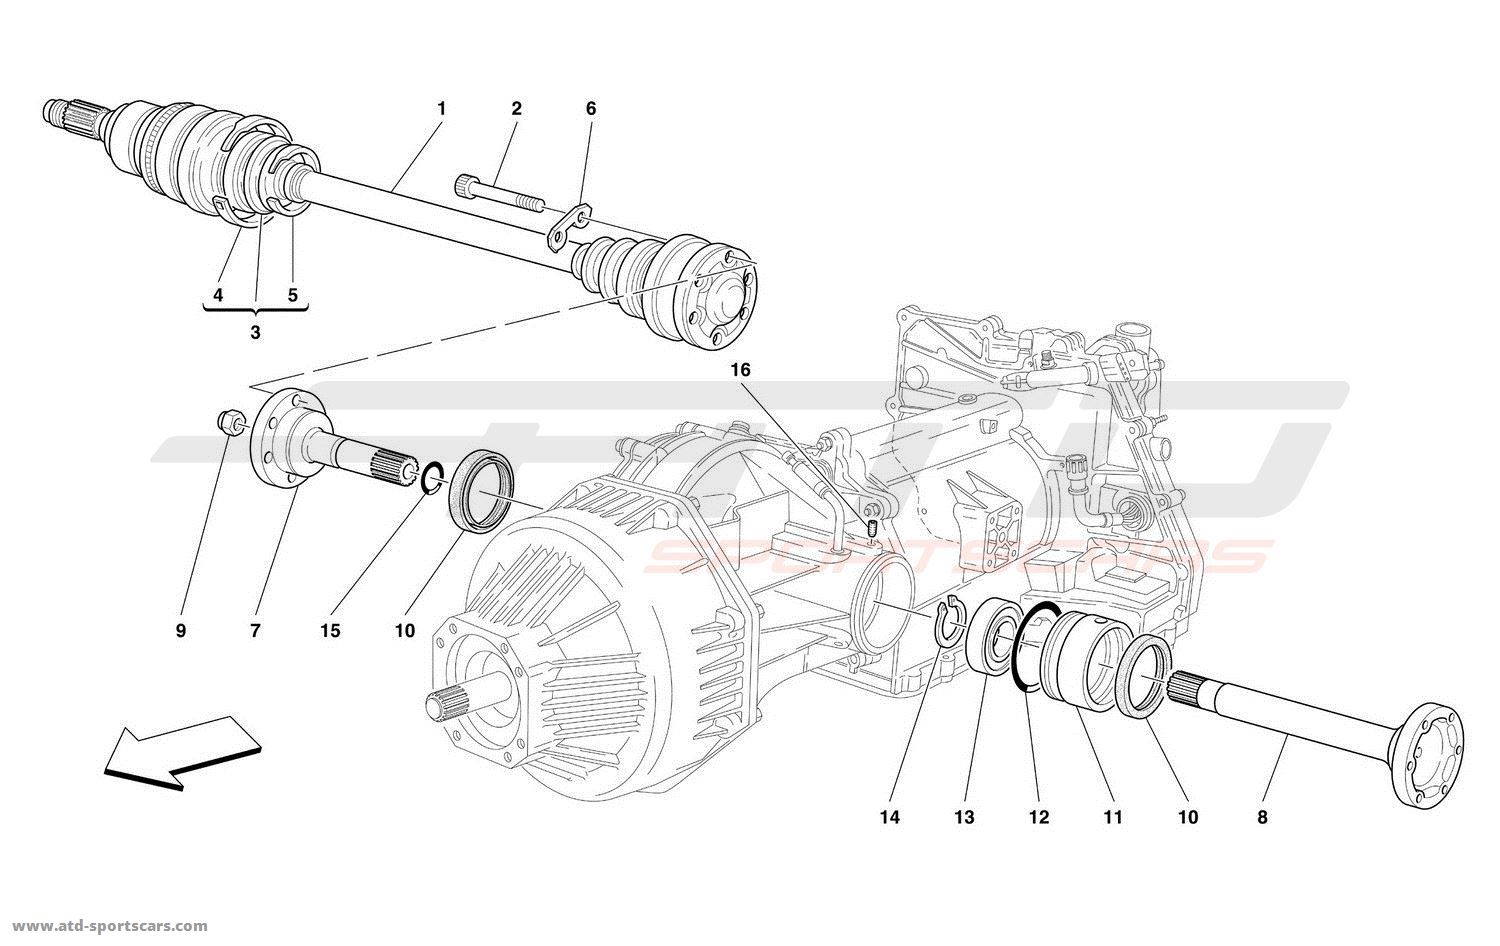 FLANGES AND AXLE SHAFT